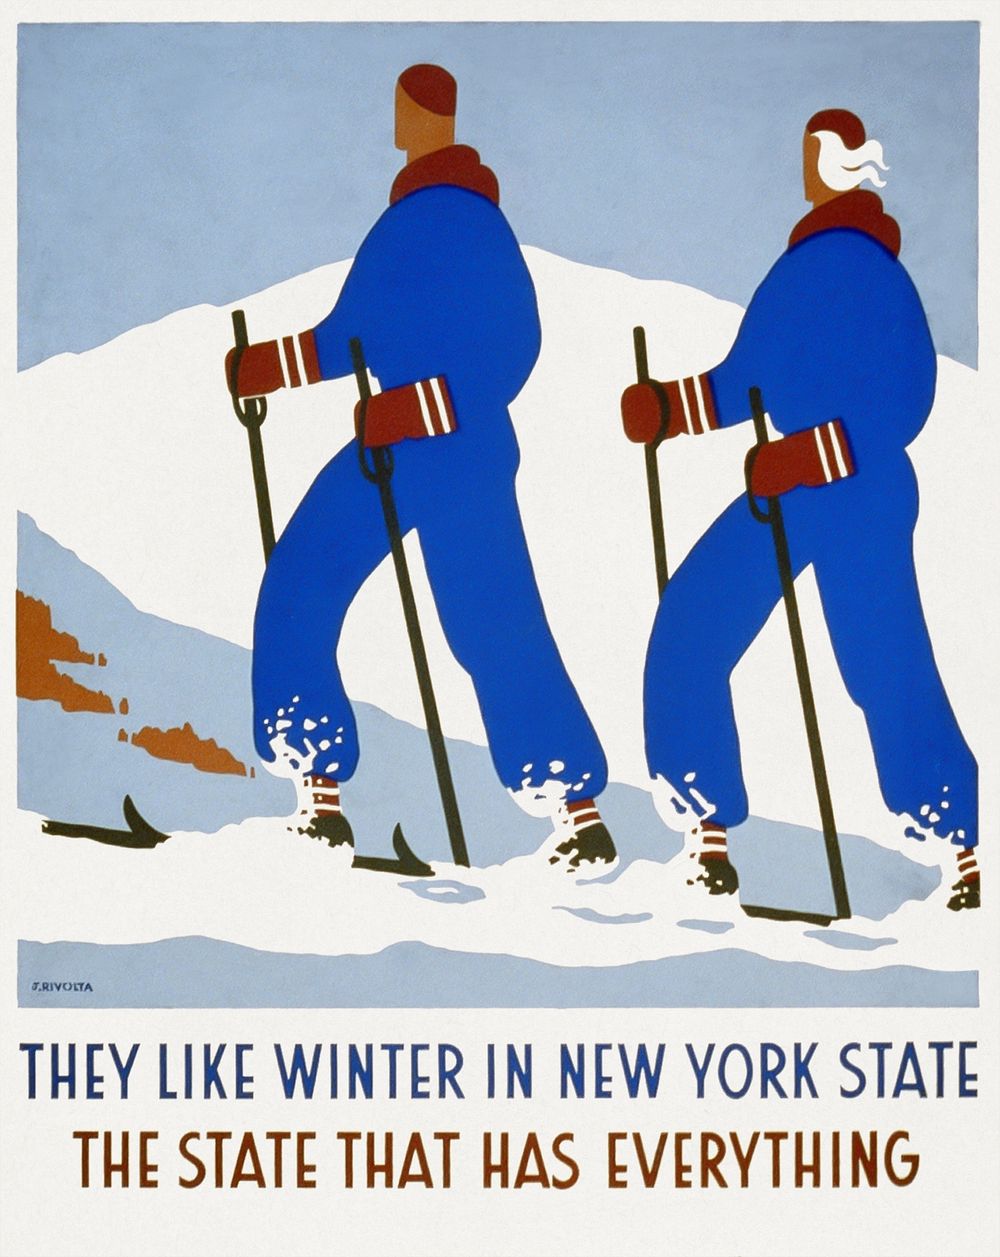 They like winter in New York State The state that has everything (1890) vintage ski poster by Jack Rivolta. Original public…